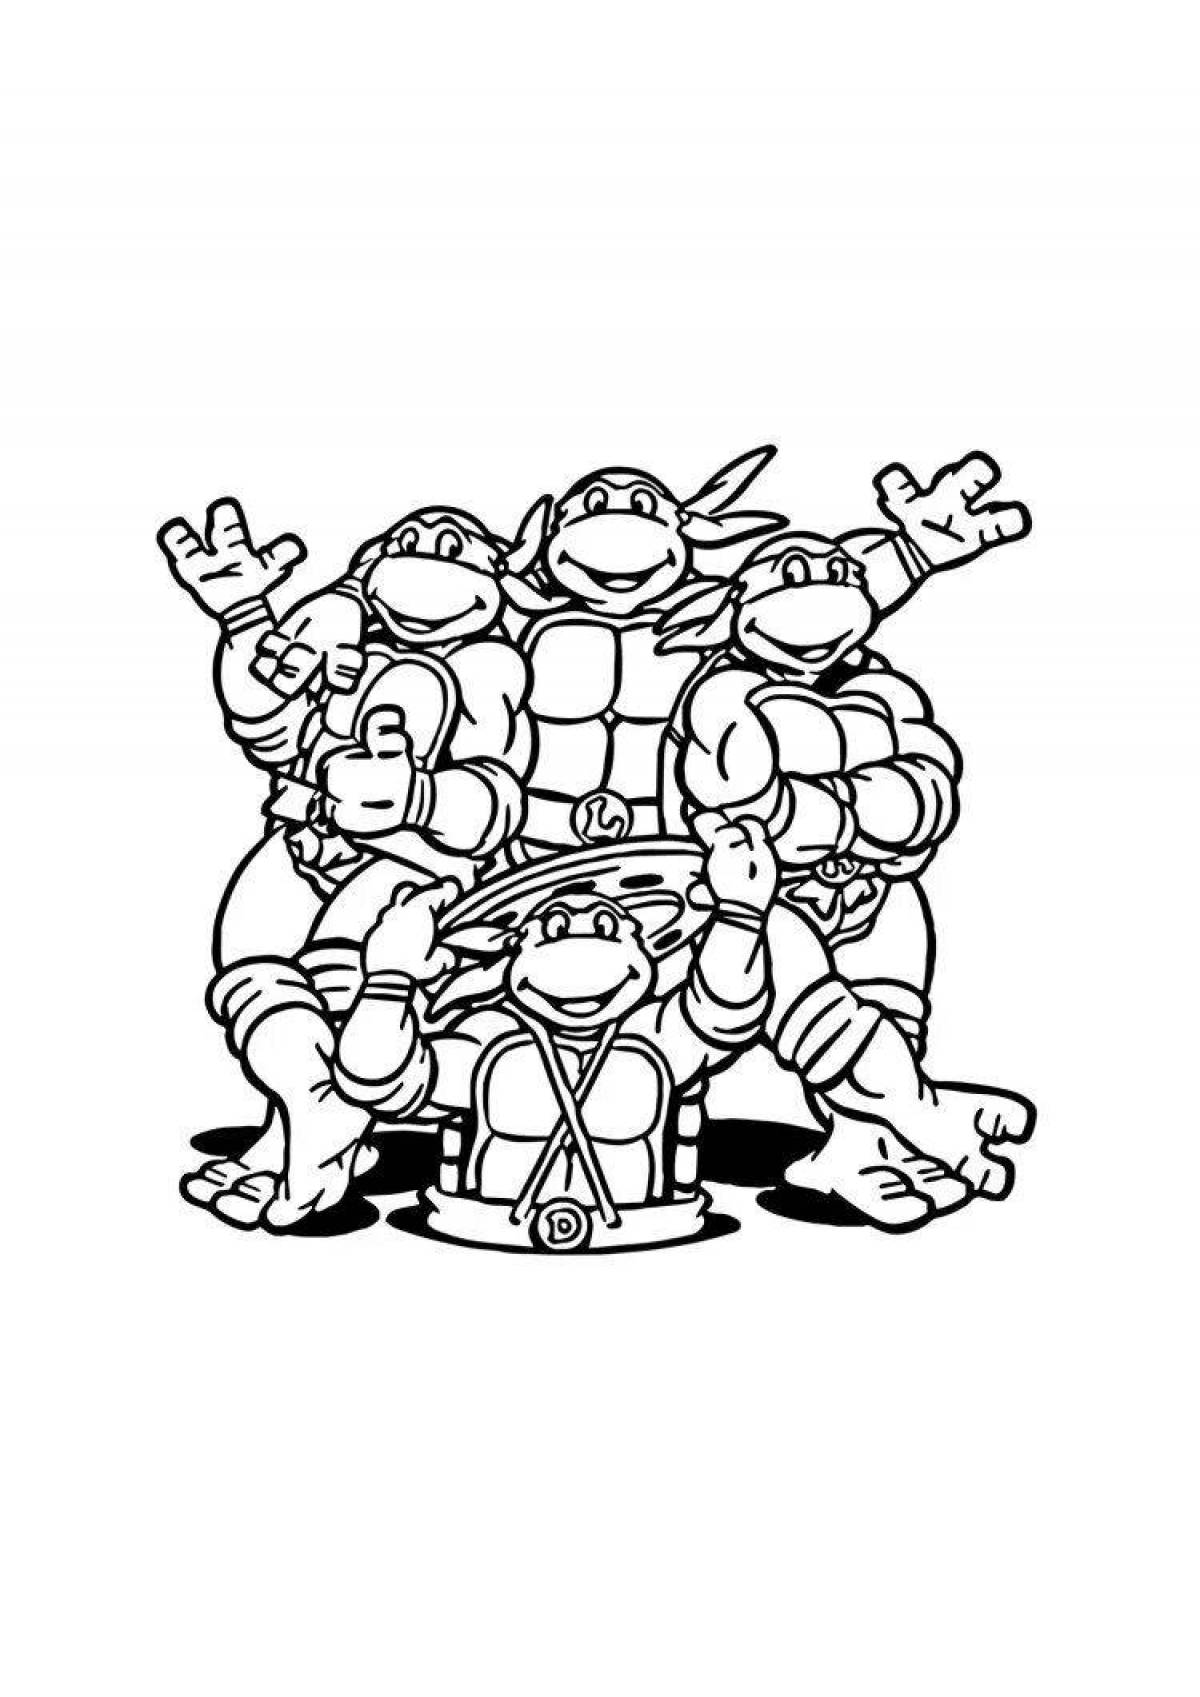 Color-frenzy coloring page mickey ninja turtles